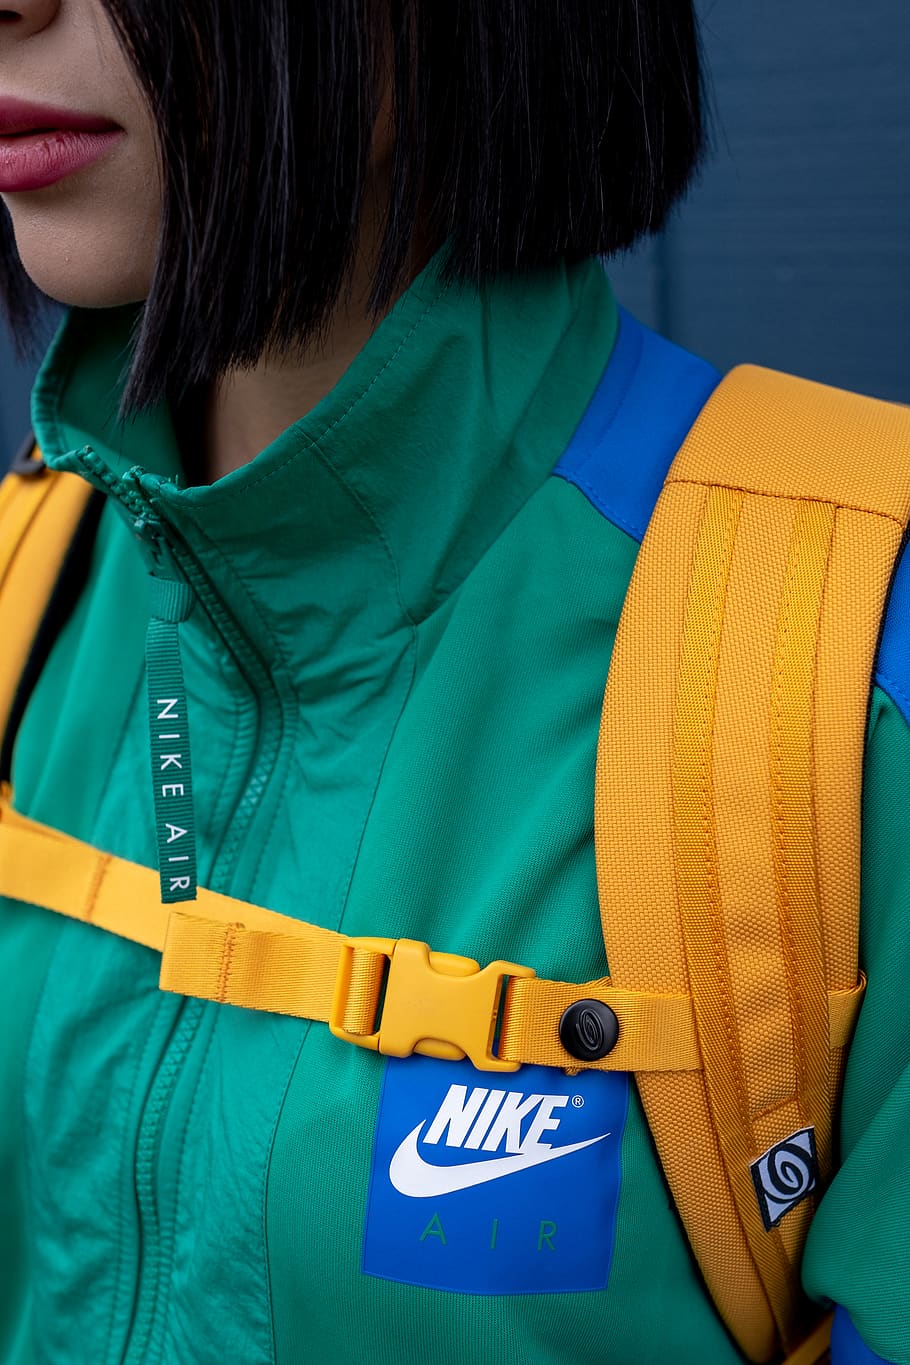 Woman Wearing Green Nike Zip Top and Yellow Backpack, adult, brand trademark, HD wallpaper